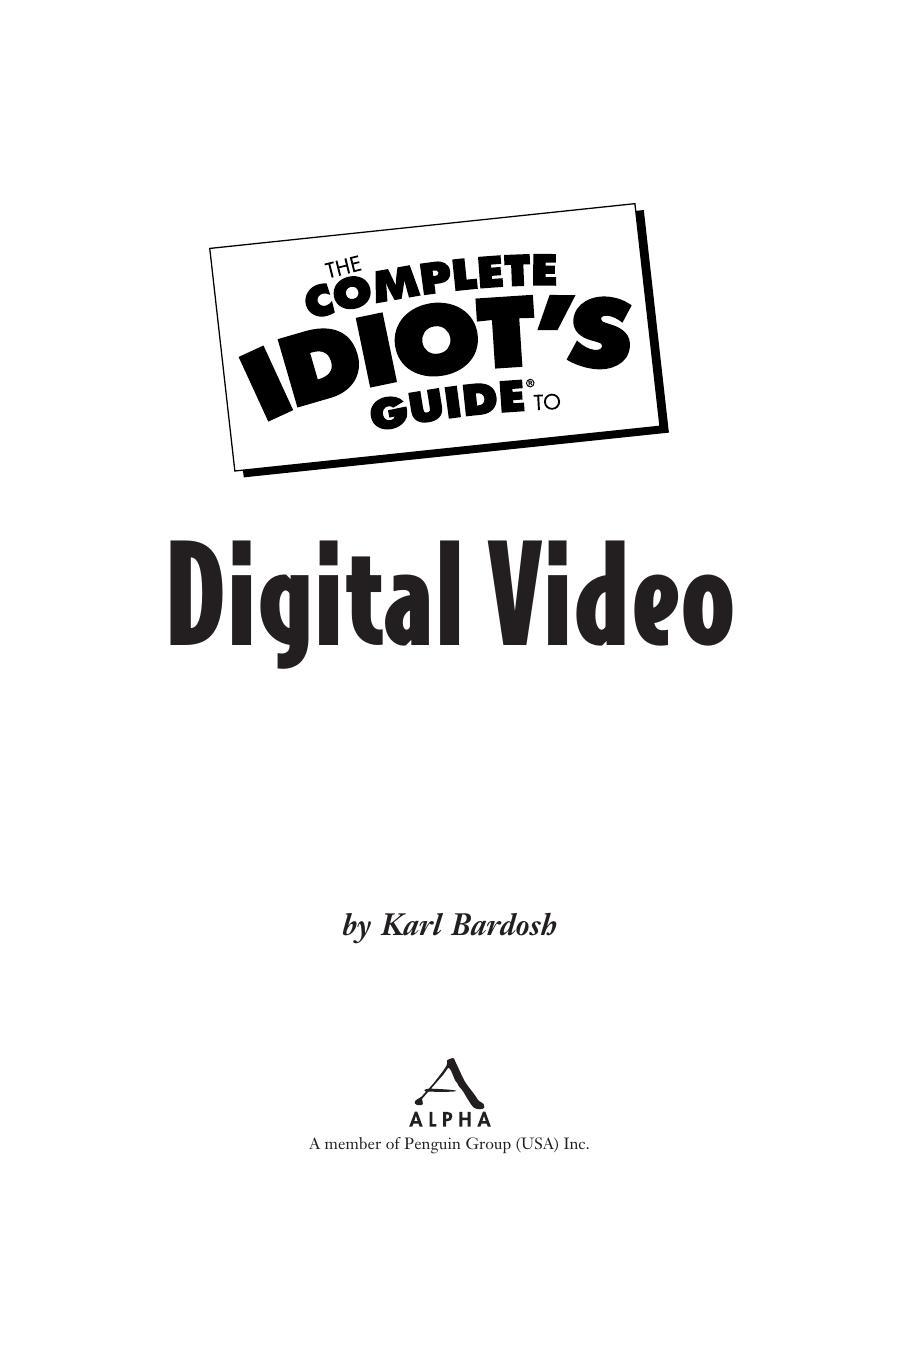 The Complete Idiot's Guide to Digital Video by Karl Bardosh